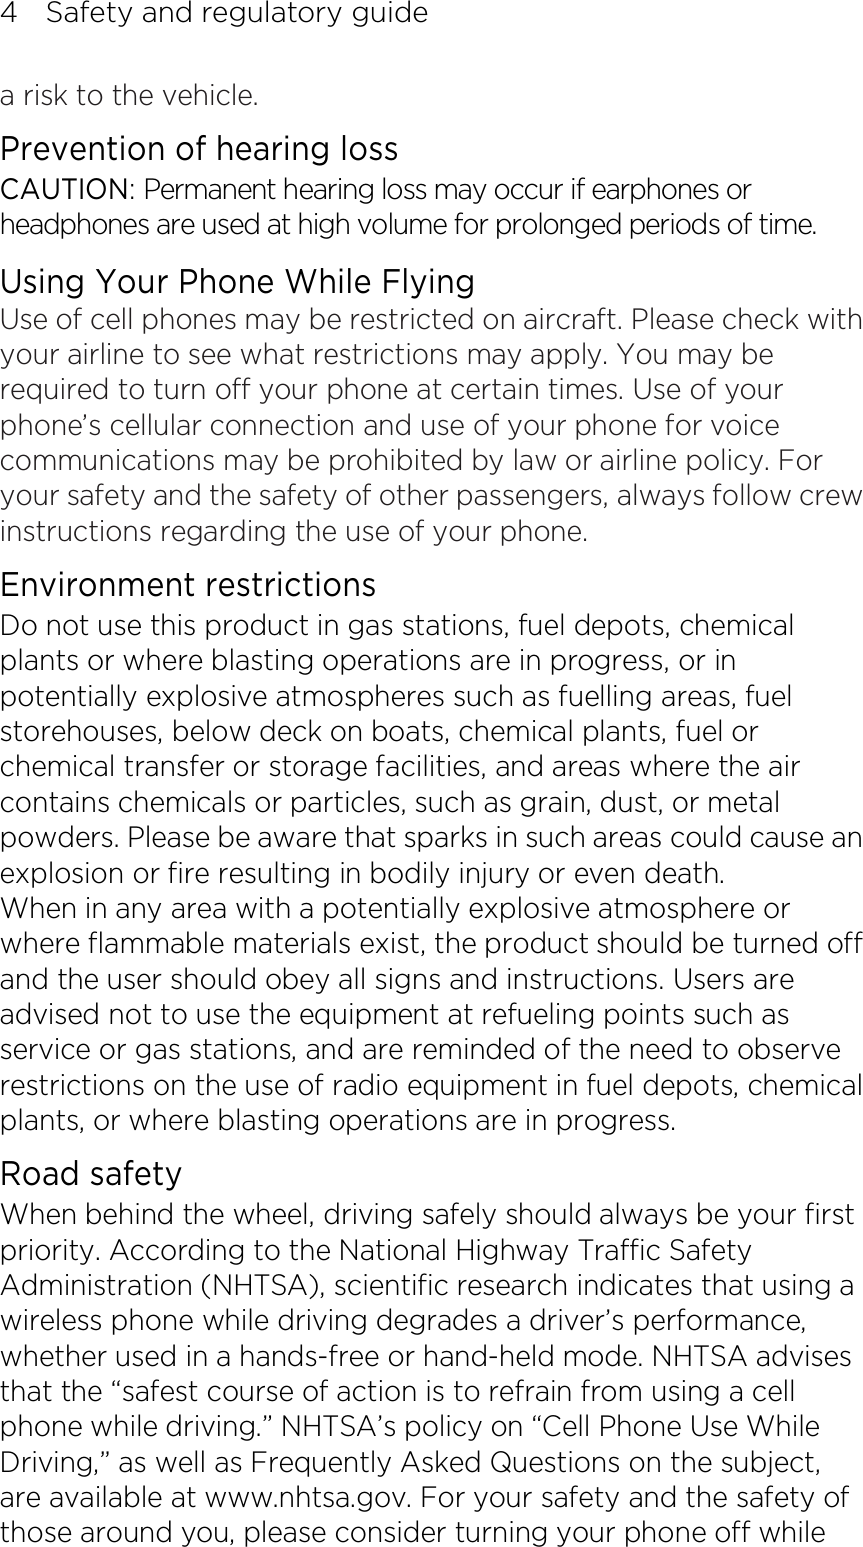 4    Safety and regulatory guide a risk to the vehicle. Prevention of hearing loss CAUTION: Permanent hearing loss may occur if earphones or headphones are used at high volume for prolonged periods of time. Using Your Phone While Flying Use of cell phones may be restricted on aircraft. Please check with your airline to see what restrictions may apply. You may be required to turn off your phone at certain times. Use of your phone’s cellular connection and use of your phone for voice communications may be prohibited by law or airline policy. For your safety and the safety of other passengers, always follow crew instructions regarding the use of your phone. Environment restrictions Do not use this product in gas stations, fuel depots, chemical plants or where blasting operations are in progress, or in potentially explosive atmospheres such as fuelling areas, fuel storehouses, below deck on boats, chemical plants, fuel or chemical transfer or storage facilities, and areas where the air contains chemicals or particles, such as grain, dust, or metal powders. Please be aware that sparks in such areas could cause an explosion or fire resulting in bodily injury or even death. When in any area with a potentially explosive atmosphere or where flammable materials exist, the product should be turned off and the user should obey all signs and instructions. Users are advised not to use the equipment at refueling points such as service or gas stations, and are reminded of the need to observe restrictions on the use of radio equipment in fuel depots, chemical plants, or where blasting operations are in progress.   Road safety When behind the wheel, driving safely should always be your first priority. According to the National Highway Traffic Safety Administration (NHTSA), scientific research indicates that using a wireless phone while driving degrades a driver’s performance, whether used in a hands-free or hand-held mode. NHTSA advises that the “safest course of action is to refrain from using a cell phone while driving.” NHTSA’s policy on “Cell Phone Use While Driving,” as well as Frequently Asked Questions on the subject, are available at www.nhtsa.gov. For your safety and the safety of those around you, please consider turning your phone off while 